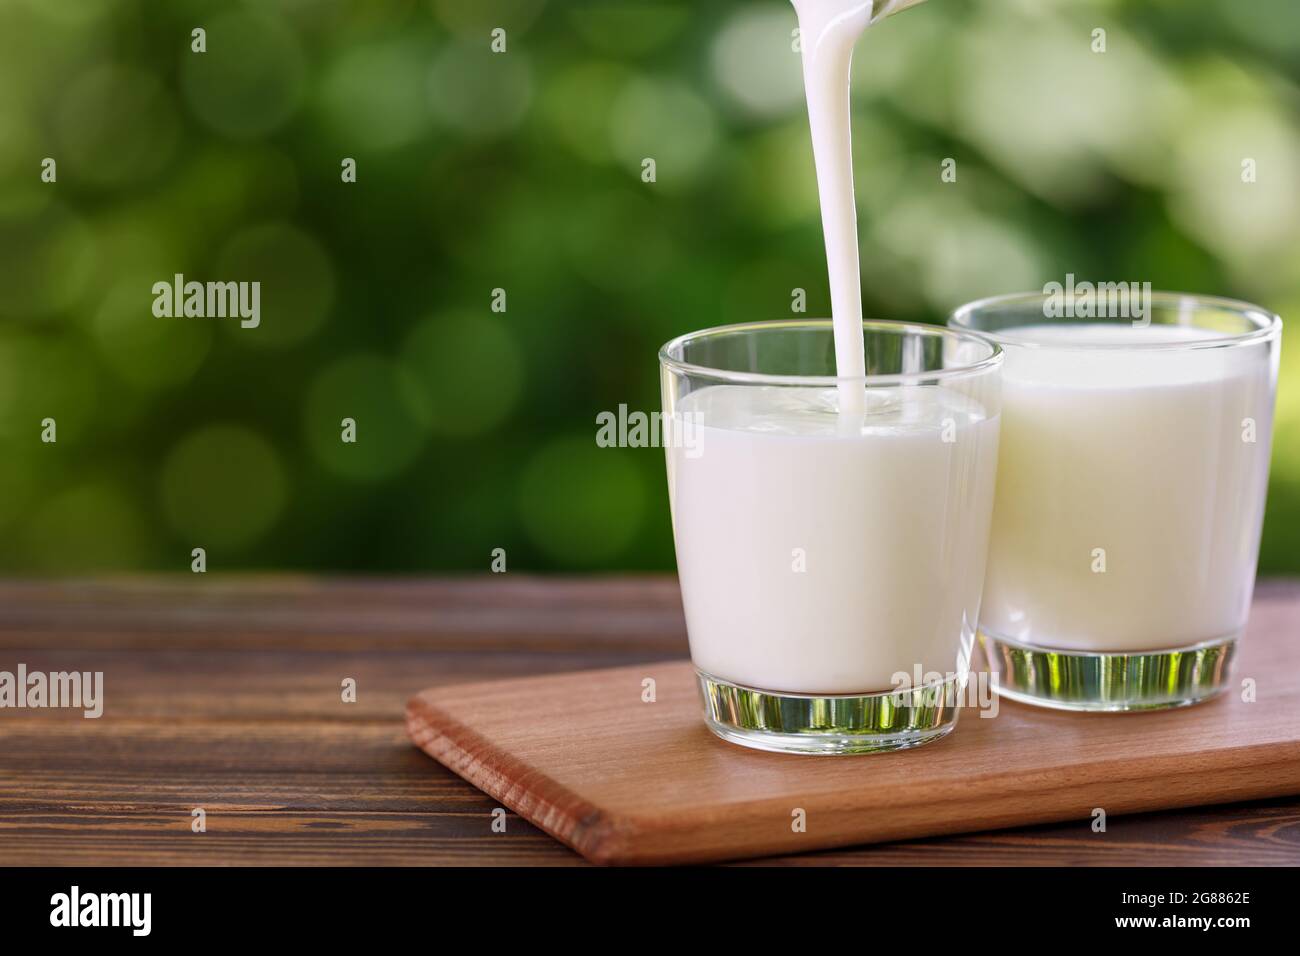 yogurt pouring into glass on wooden table Stock Photo